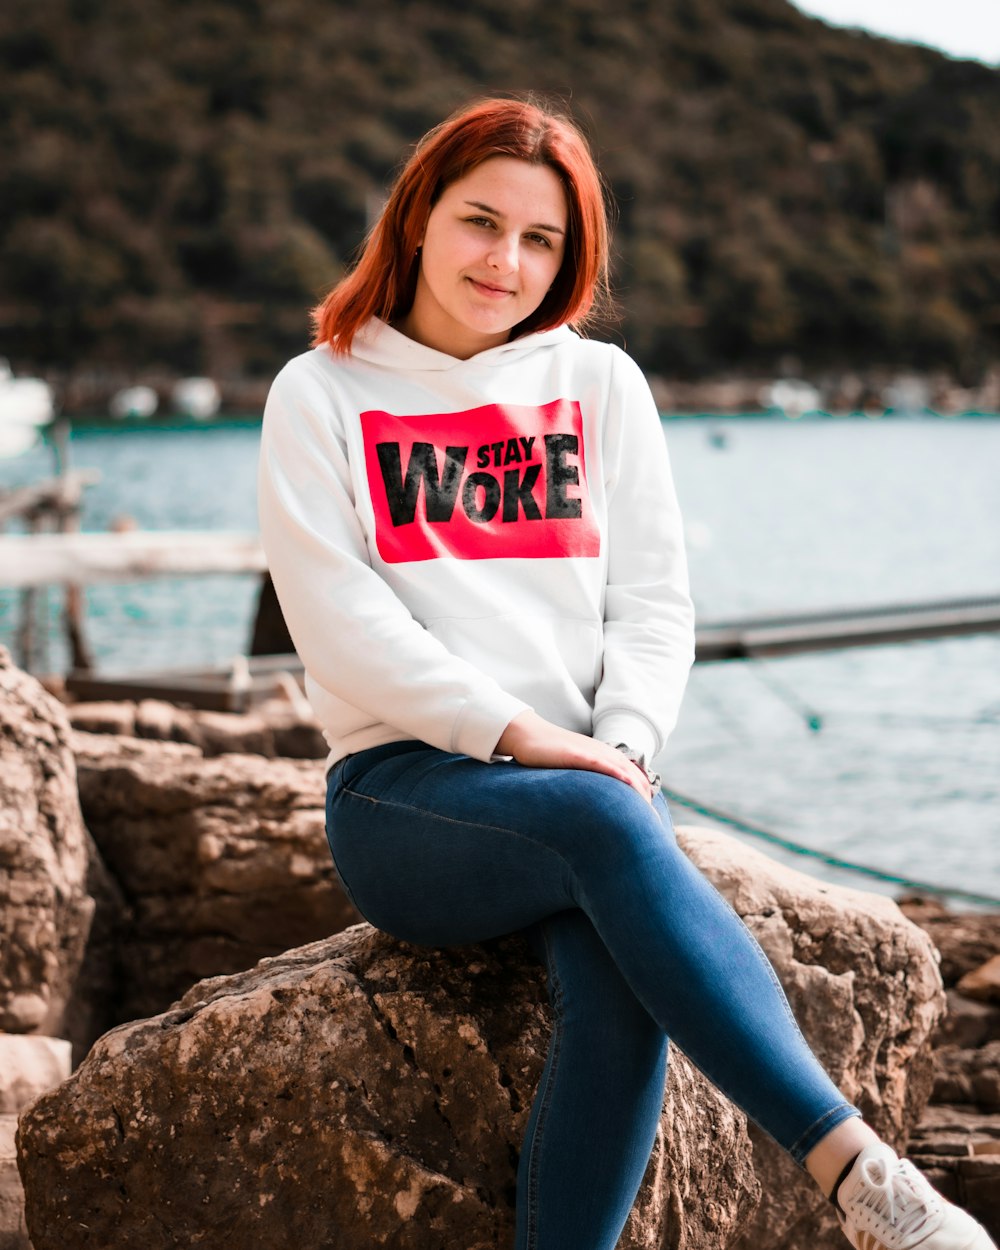 Woman in white hoodie and blue denim jeans sitting on rock near body of  water during photo – Free Person Image on Unsplash